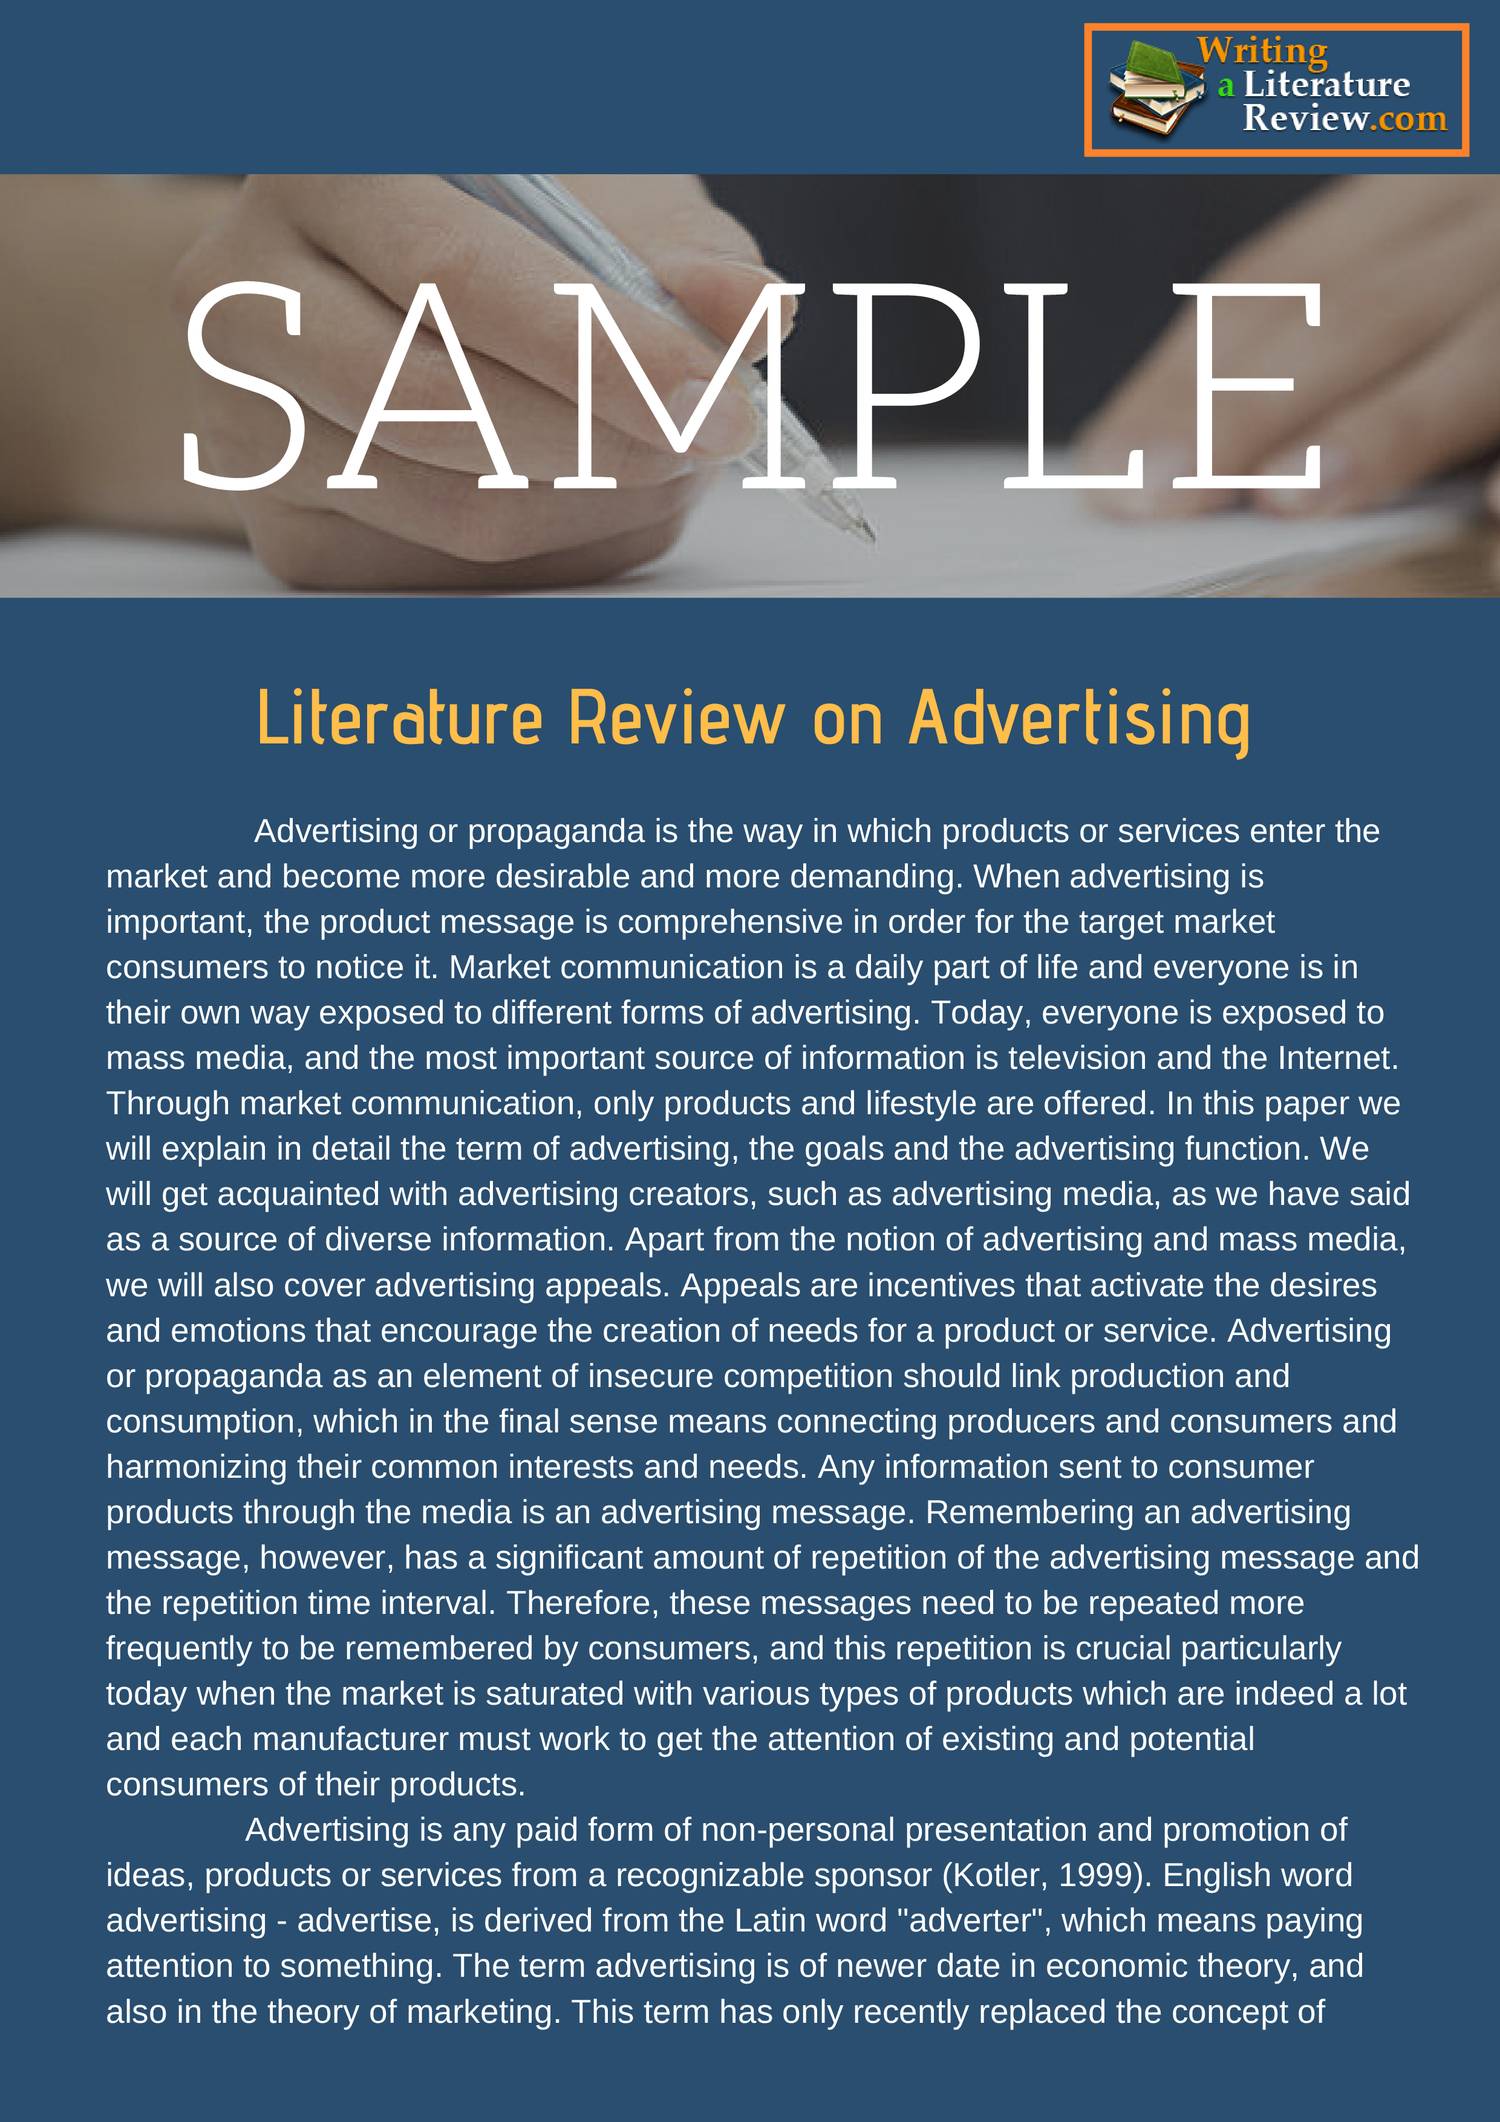 literature review on digital advertising